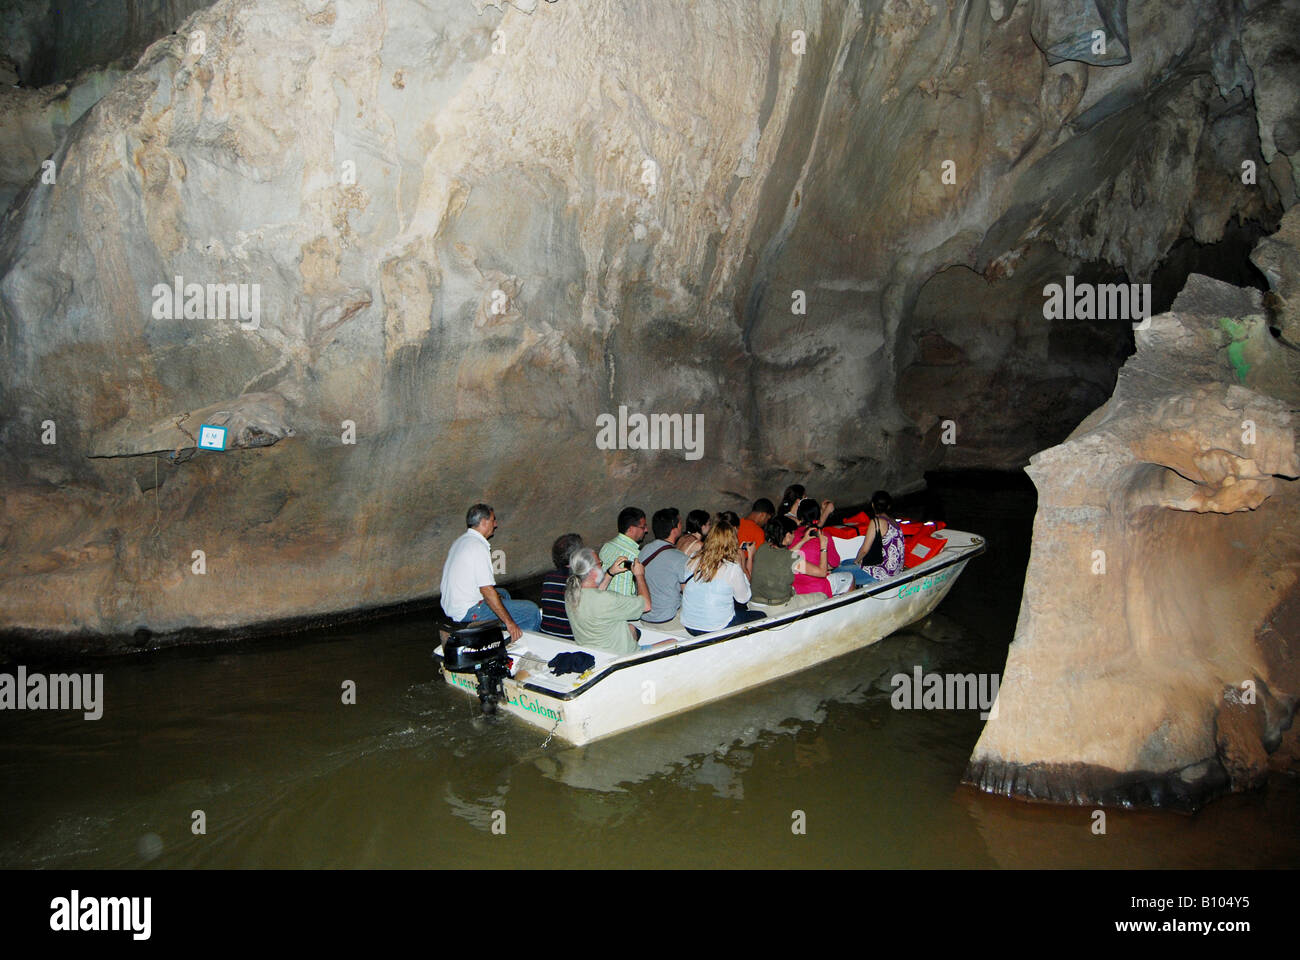 Boat tour of the Cueva del Indio Indian cave not far from Vinales Stock Photo